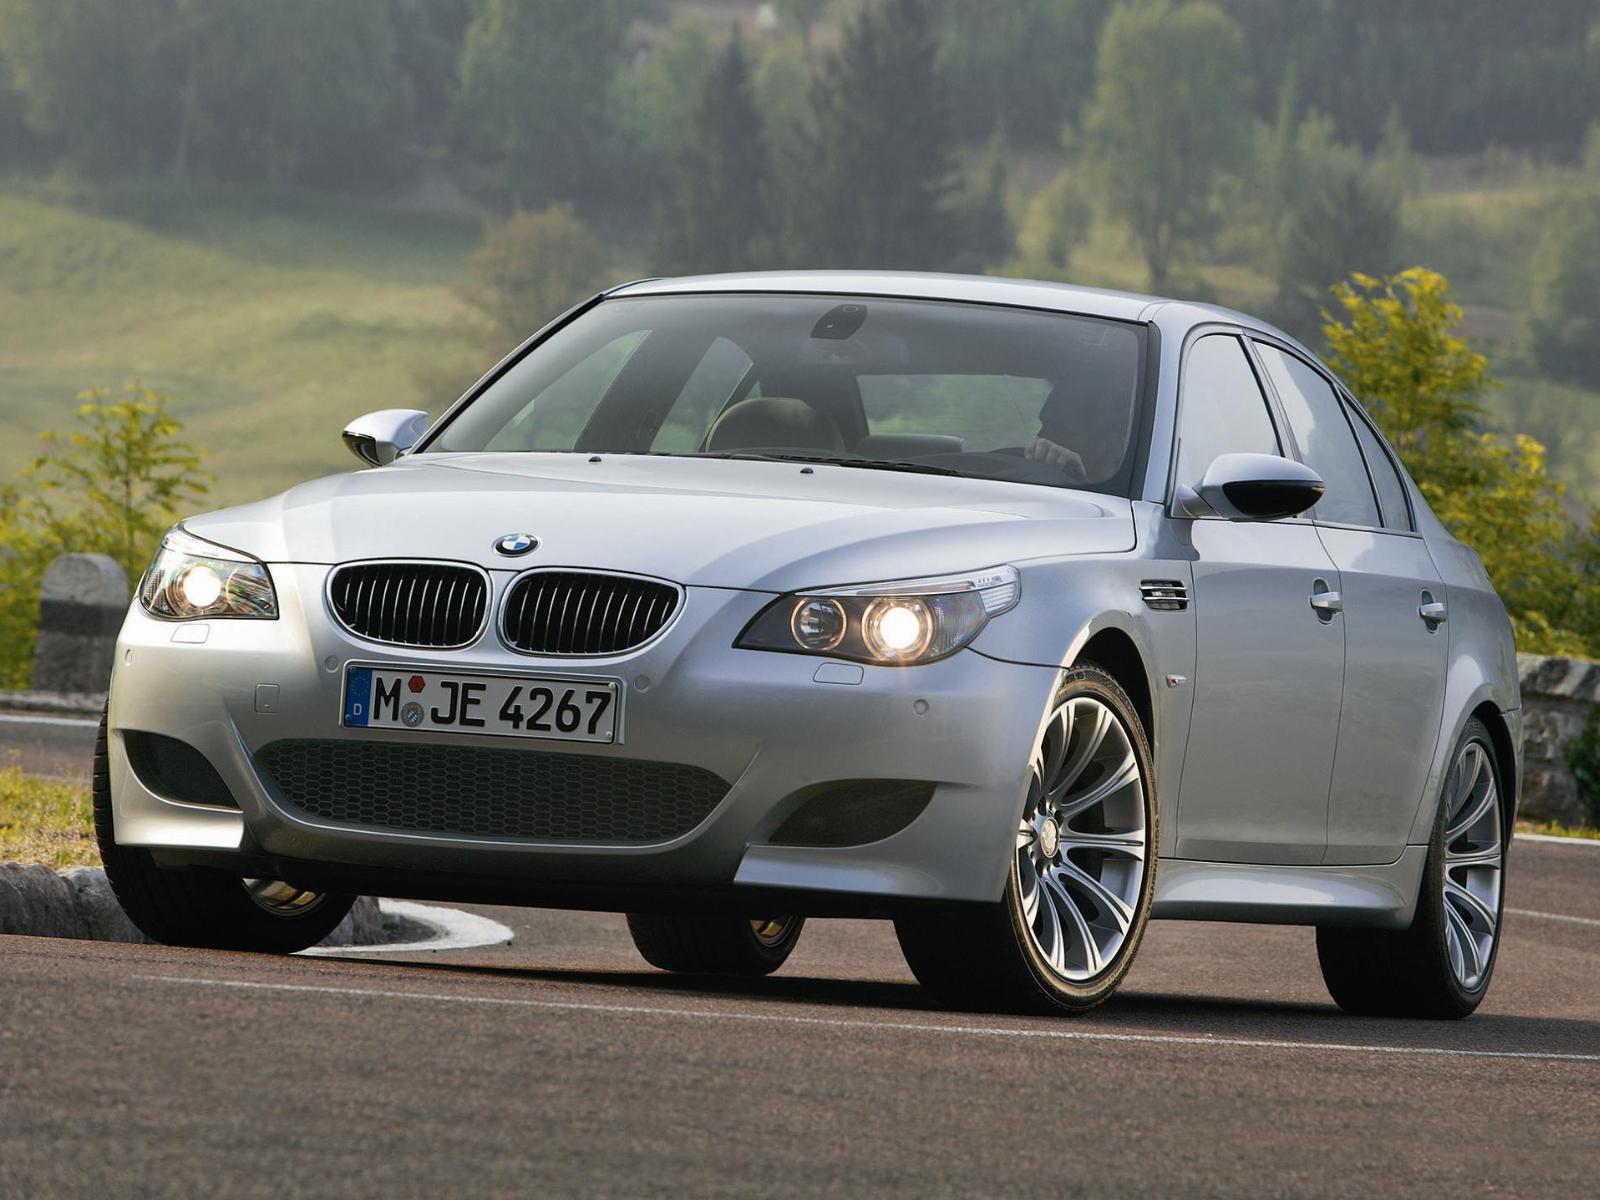 BMW M5 E60 photos PhotoGallery with 43 pics